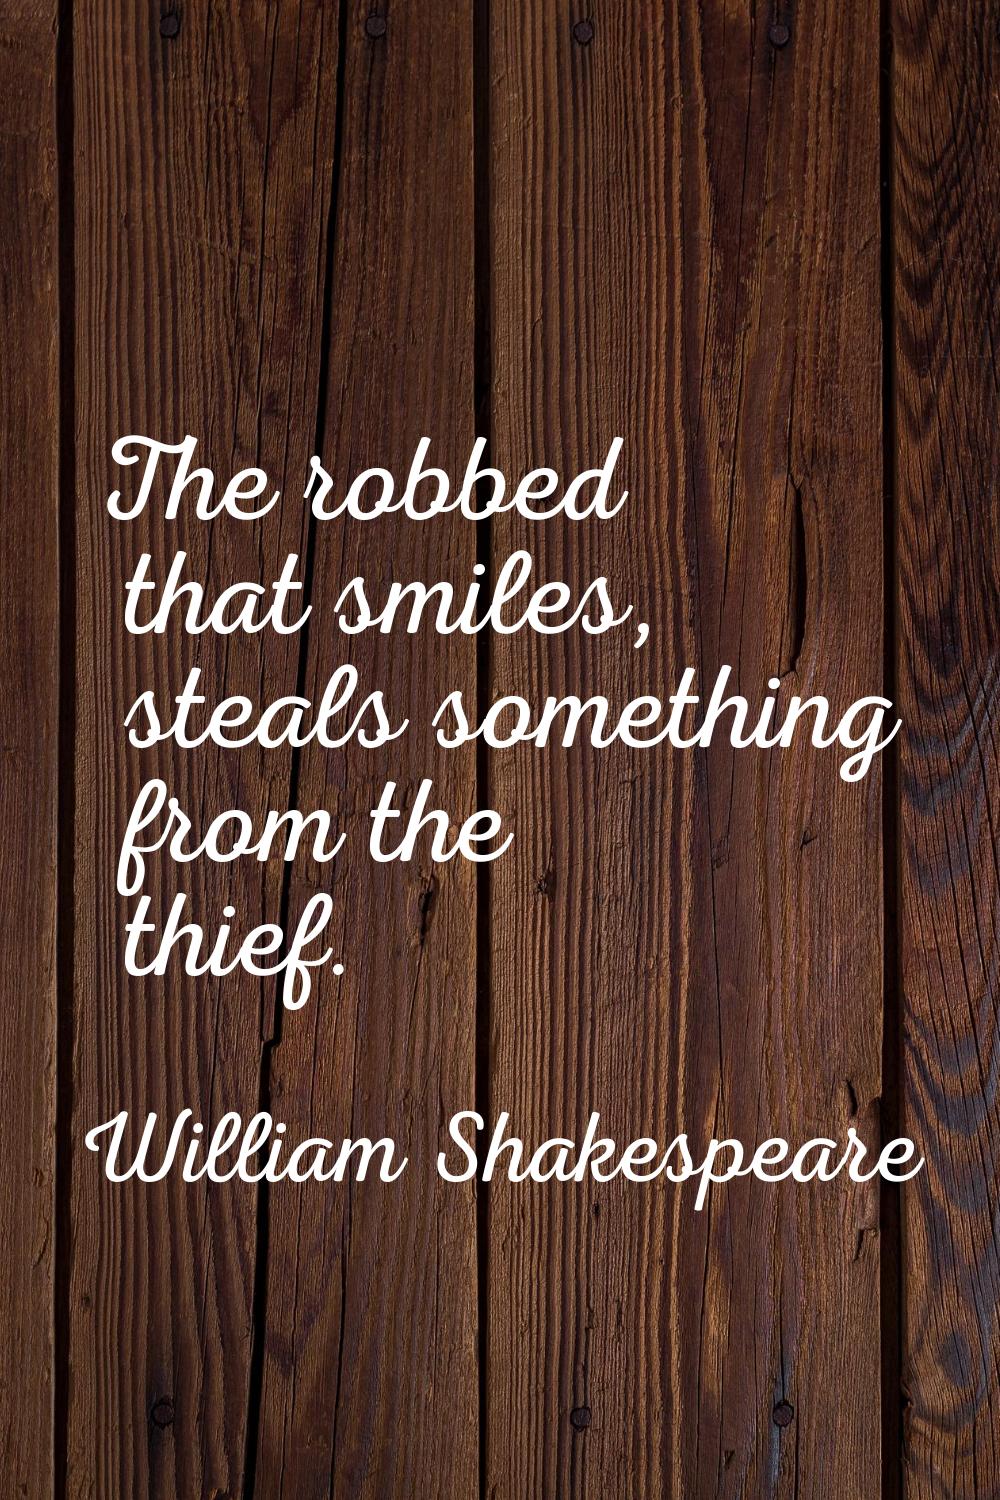 The robbed that smiles, steals something from the thief.